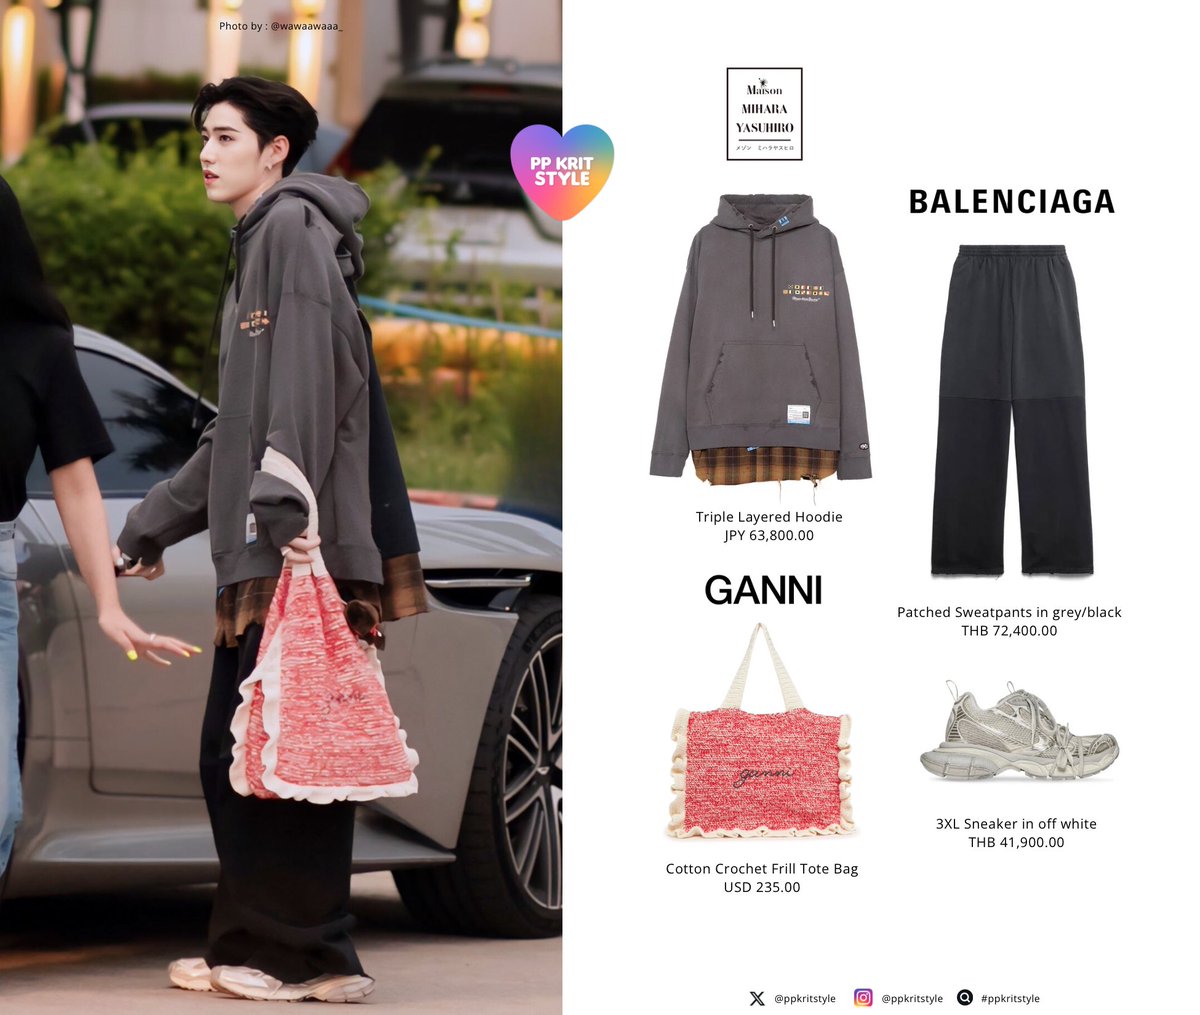 PP KRIT STYLE : #BQuikPlayPlayPlay

#MaisonMIHARAYASUHIRO Triple Layered Hoodie
#Balenciaga Patched Sweatpants and 3XL Sneaker
#GANNI Cotton Crochet Frill Tote Bag

#ppkritt #ppkritstyle